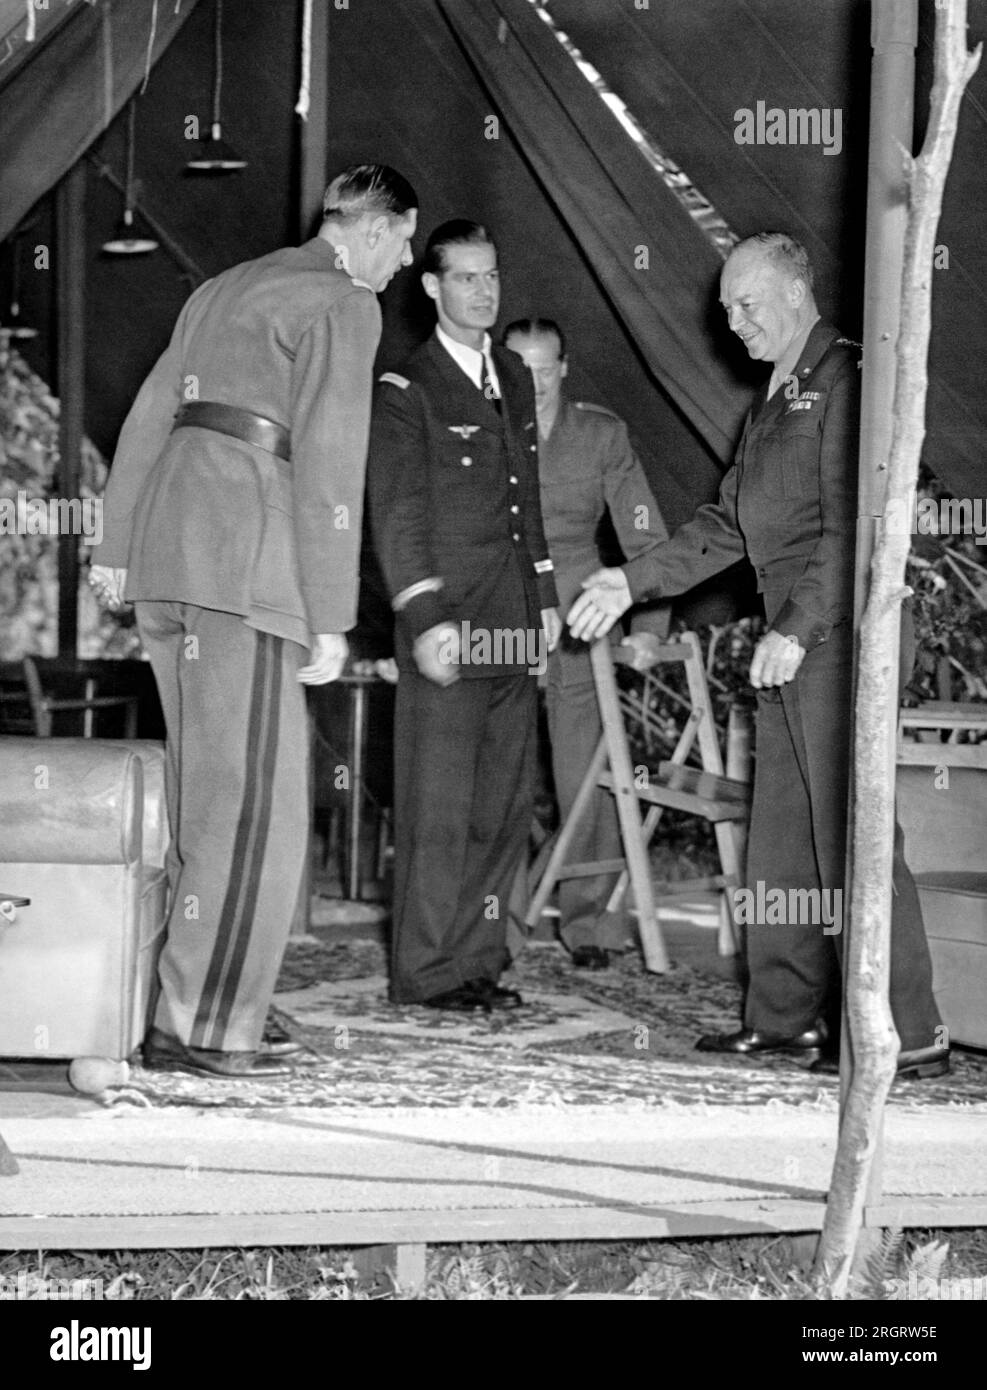 France:  August 22, 1944 General Dwight Eisenhower greets French General Charles De Gaulle and his party as they arrive at his headquarters in France for a conference. Stock Photo